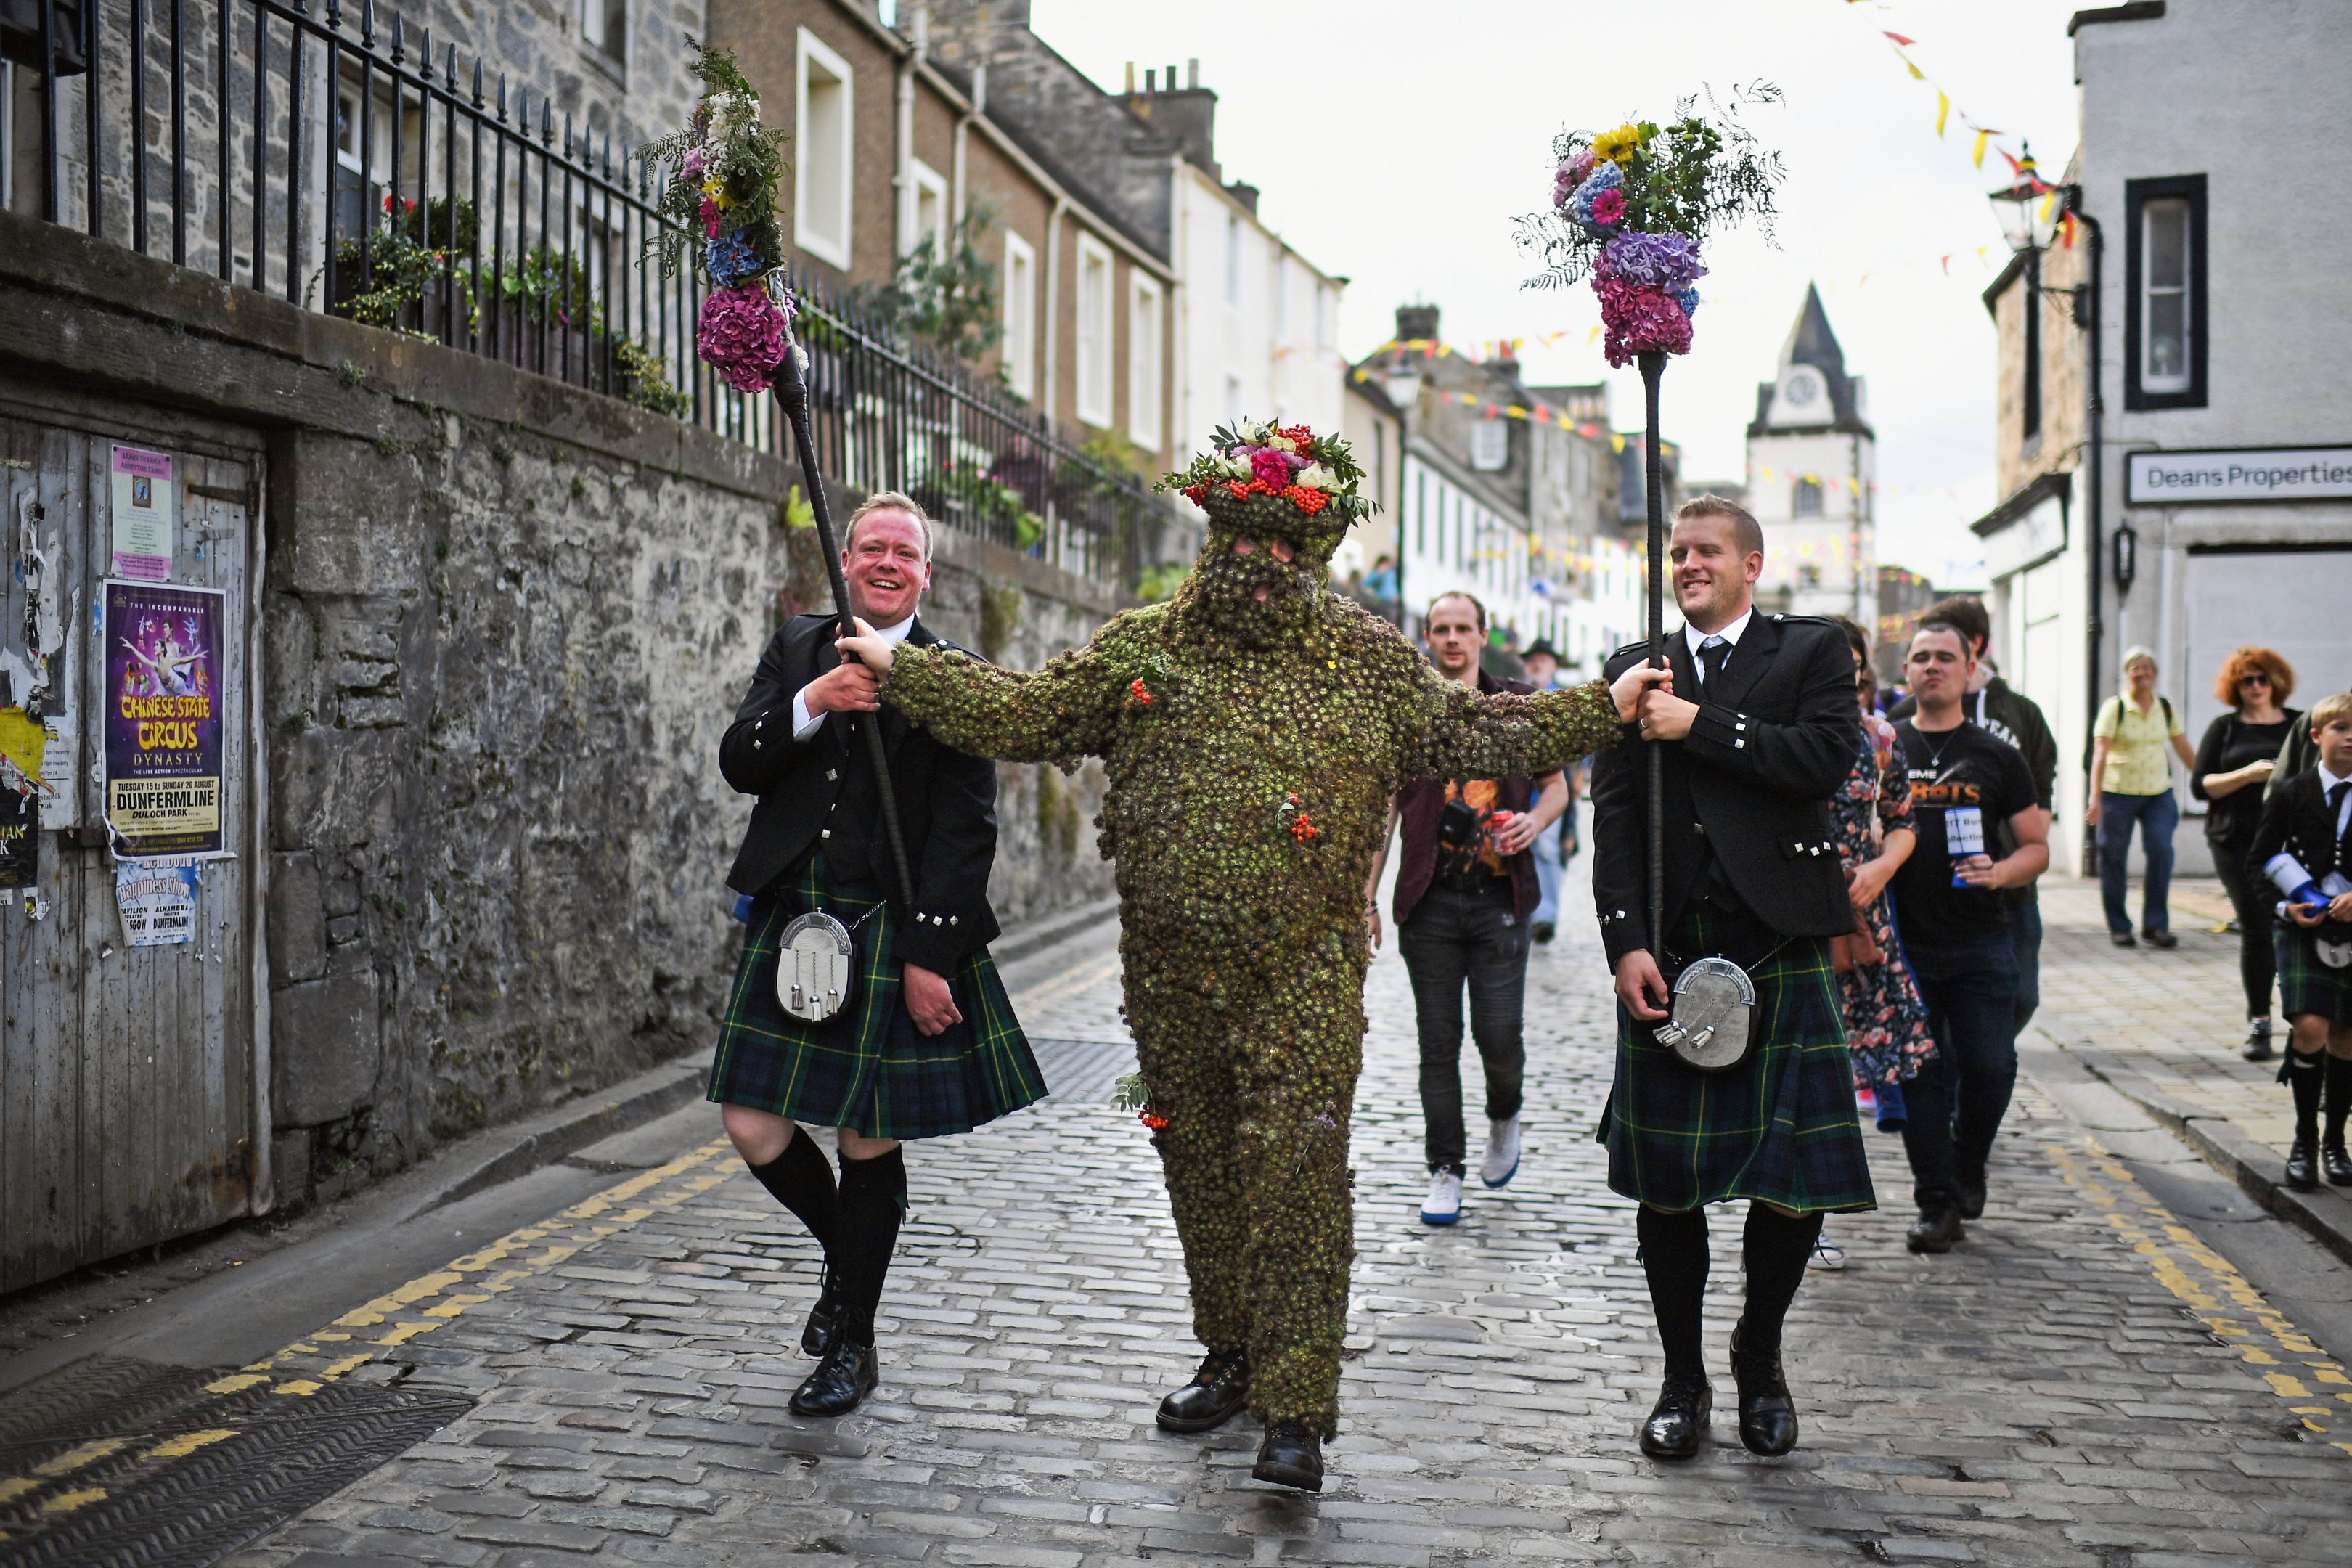 Burryman Andrew Taylor meets residents as he parades through the town in August (Jeff J Mitchell/Getty Images)